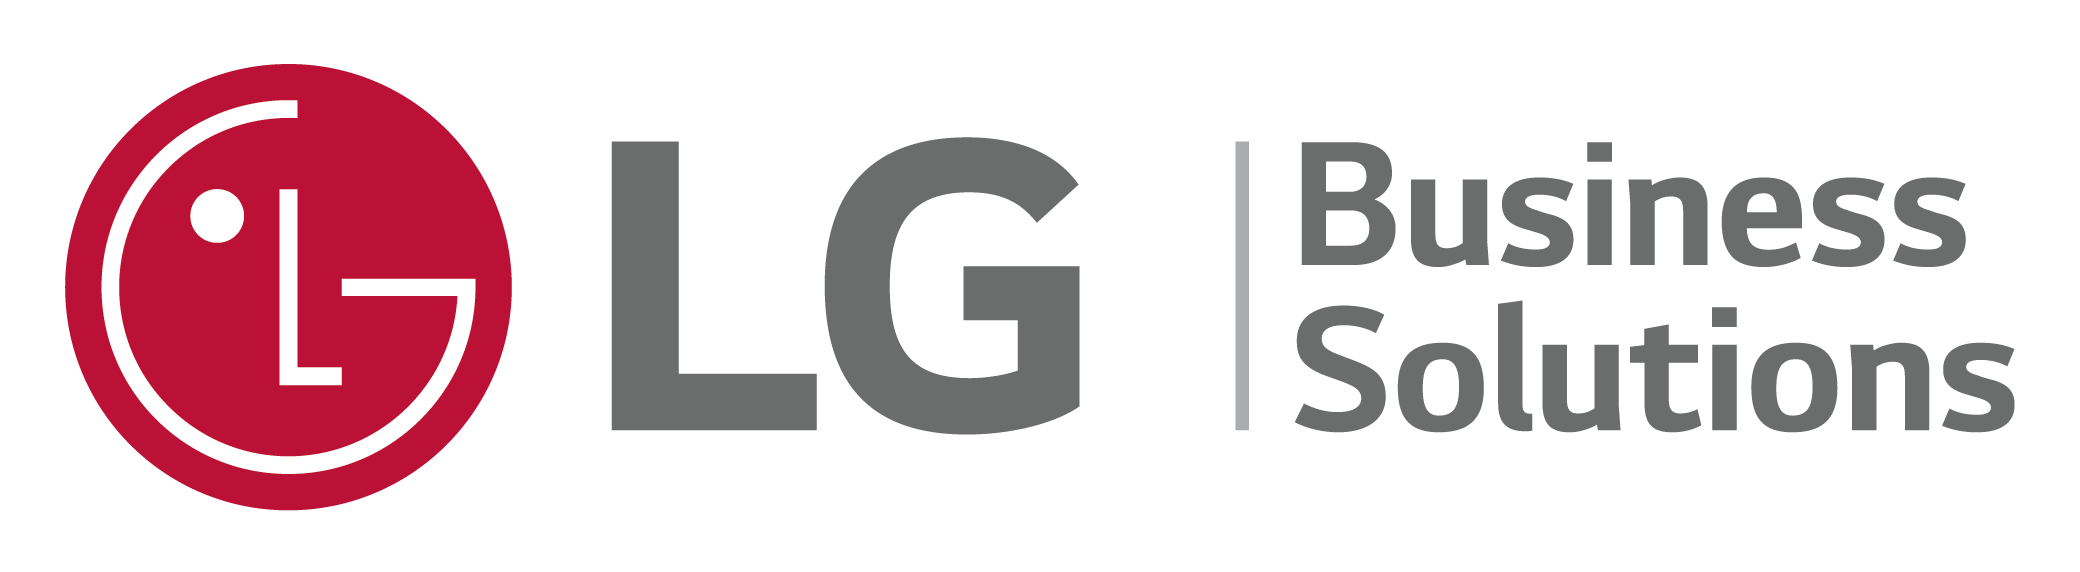 LG - Business Solutions